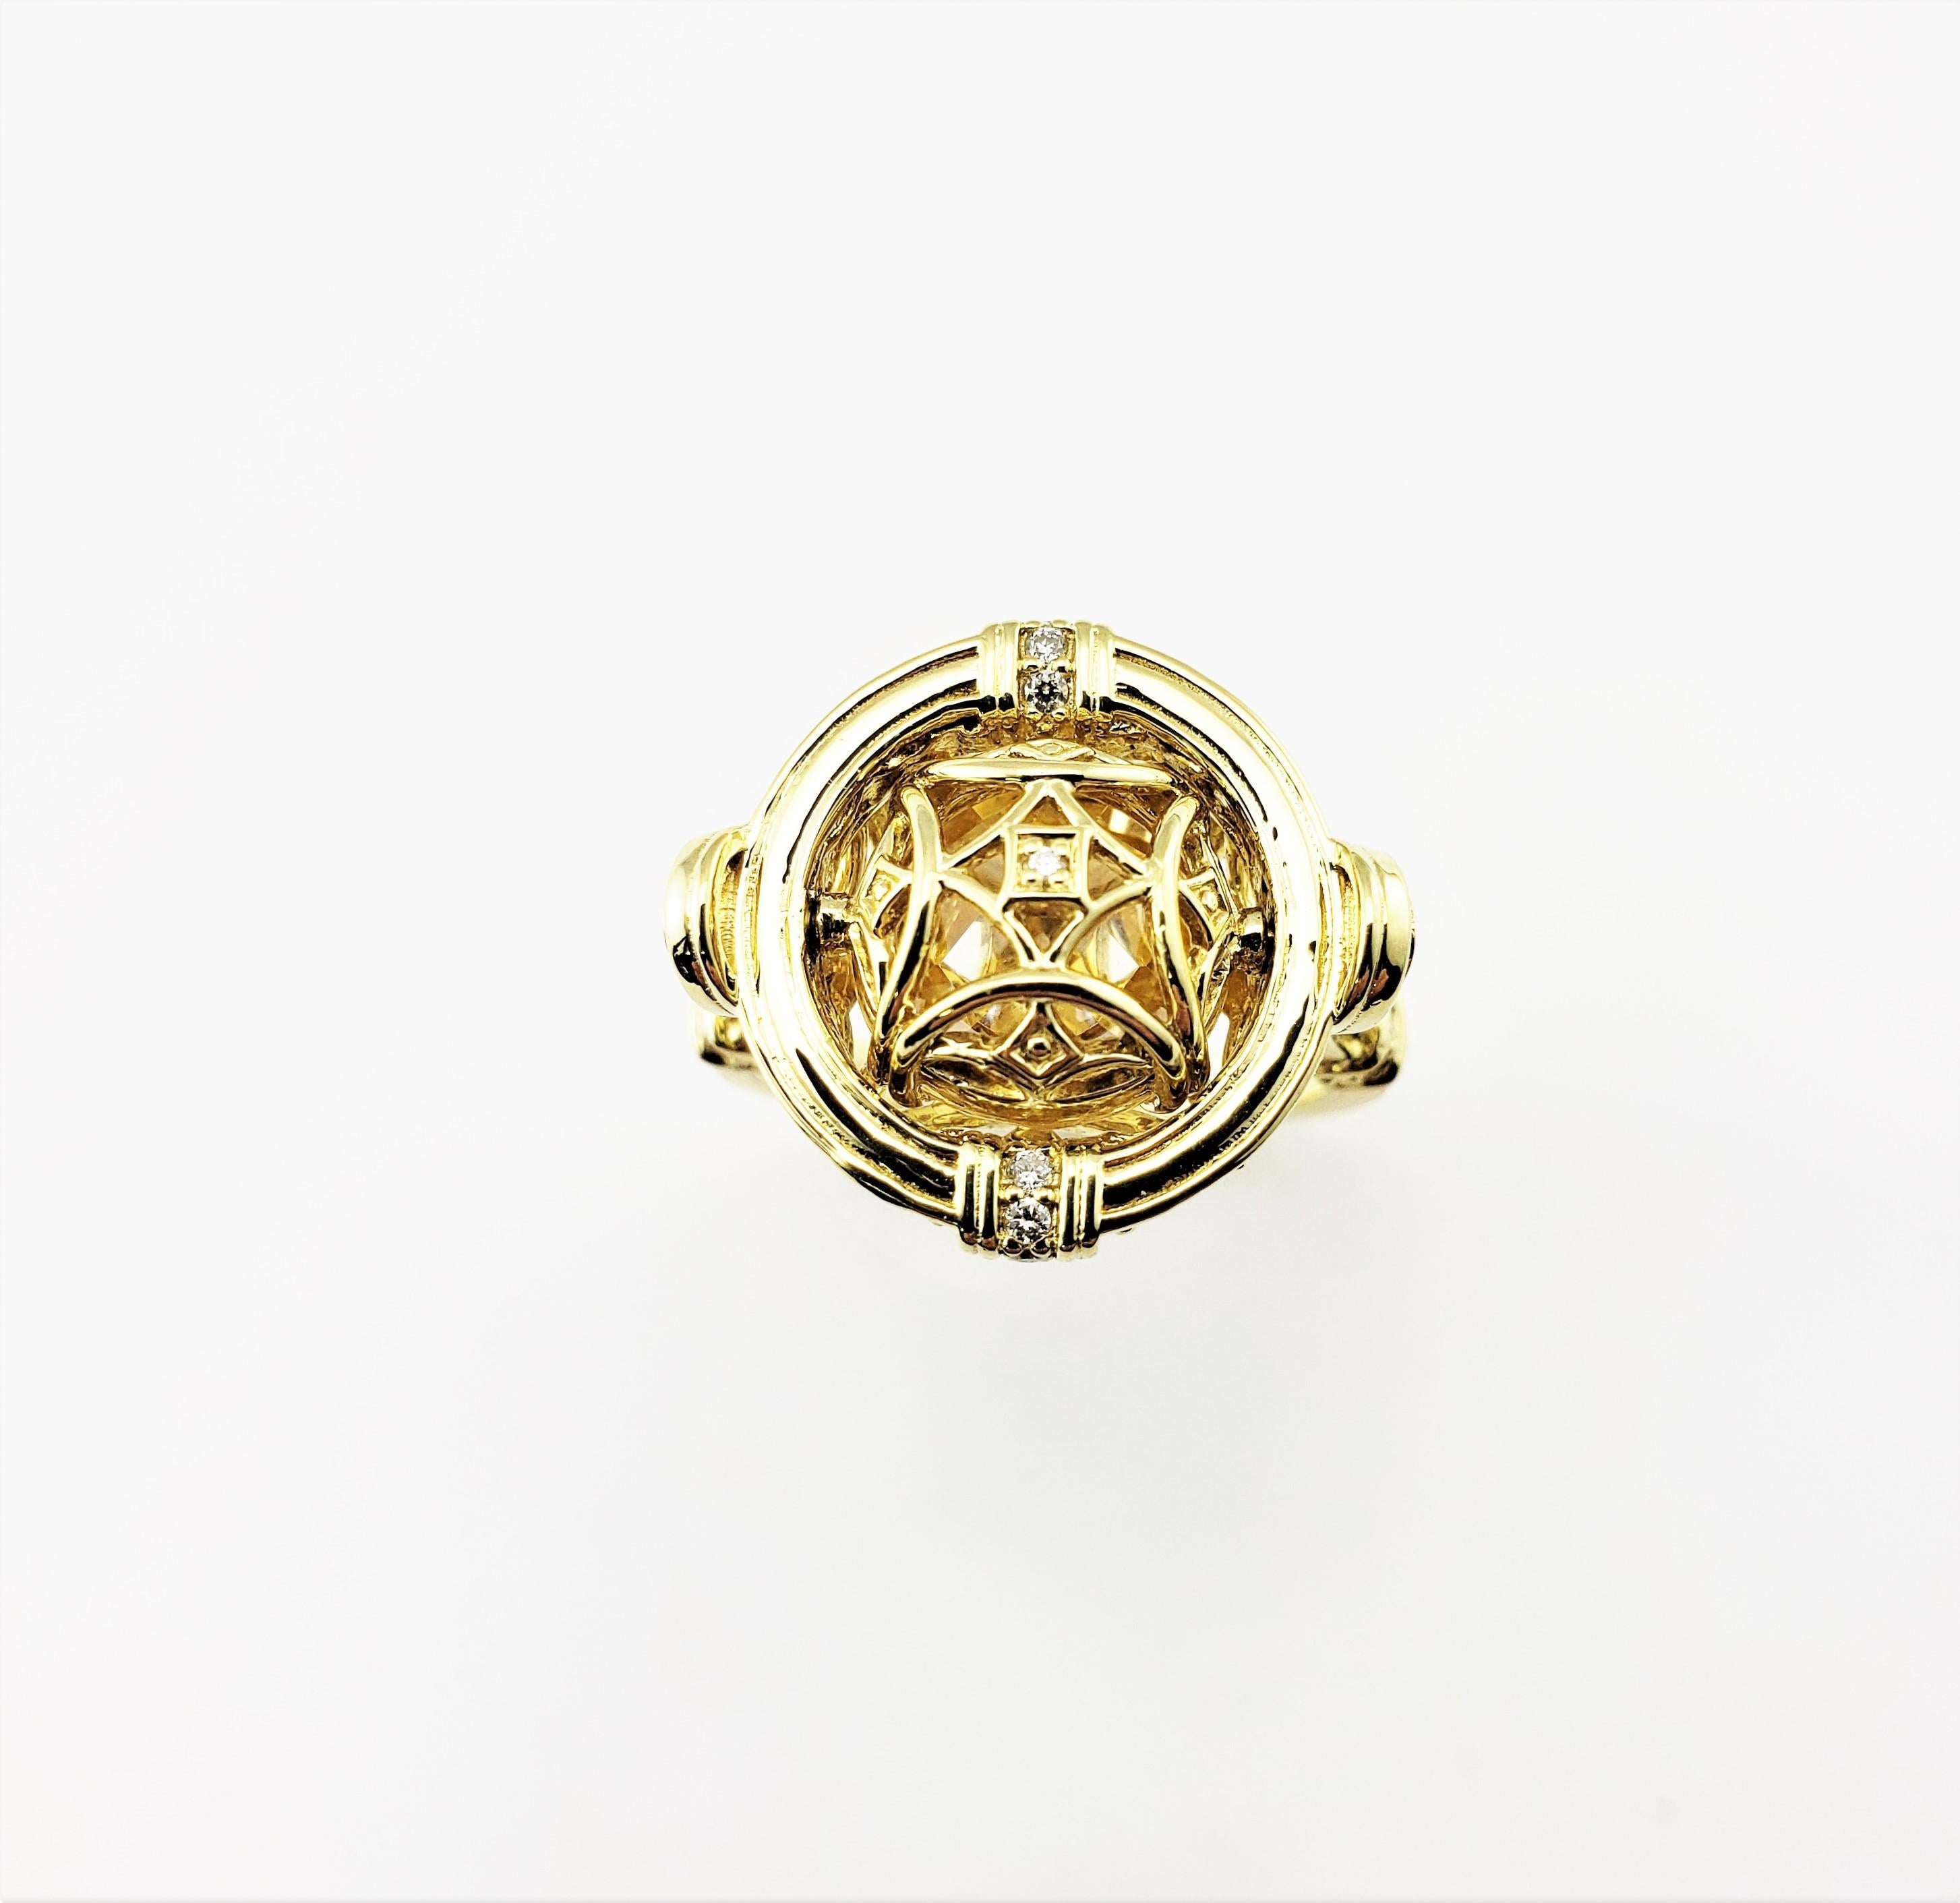 Judith Ripka 18 Karat Yellow Gold Yellow Topaz and Diamond Flip Ring Size 6.75-

This exquisitely crafted ring features one yellow topaz stone (11 mm) that flips to reveal a lovely open design.  Accented with 18 round brilliant cut diamonds set in